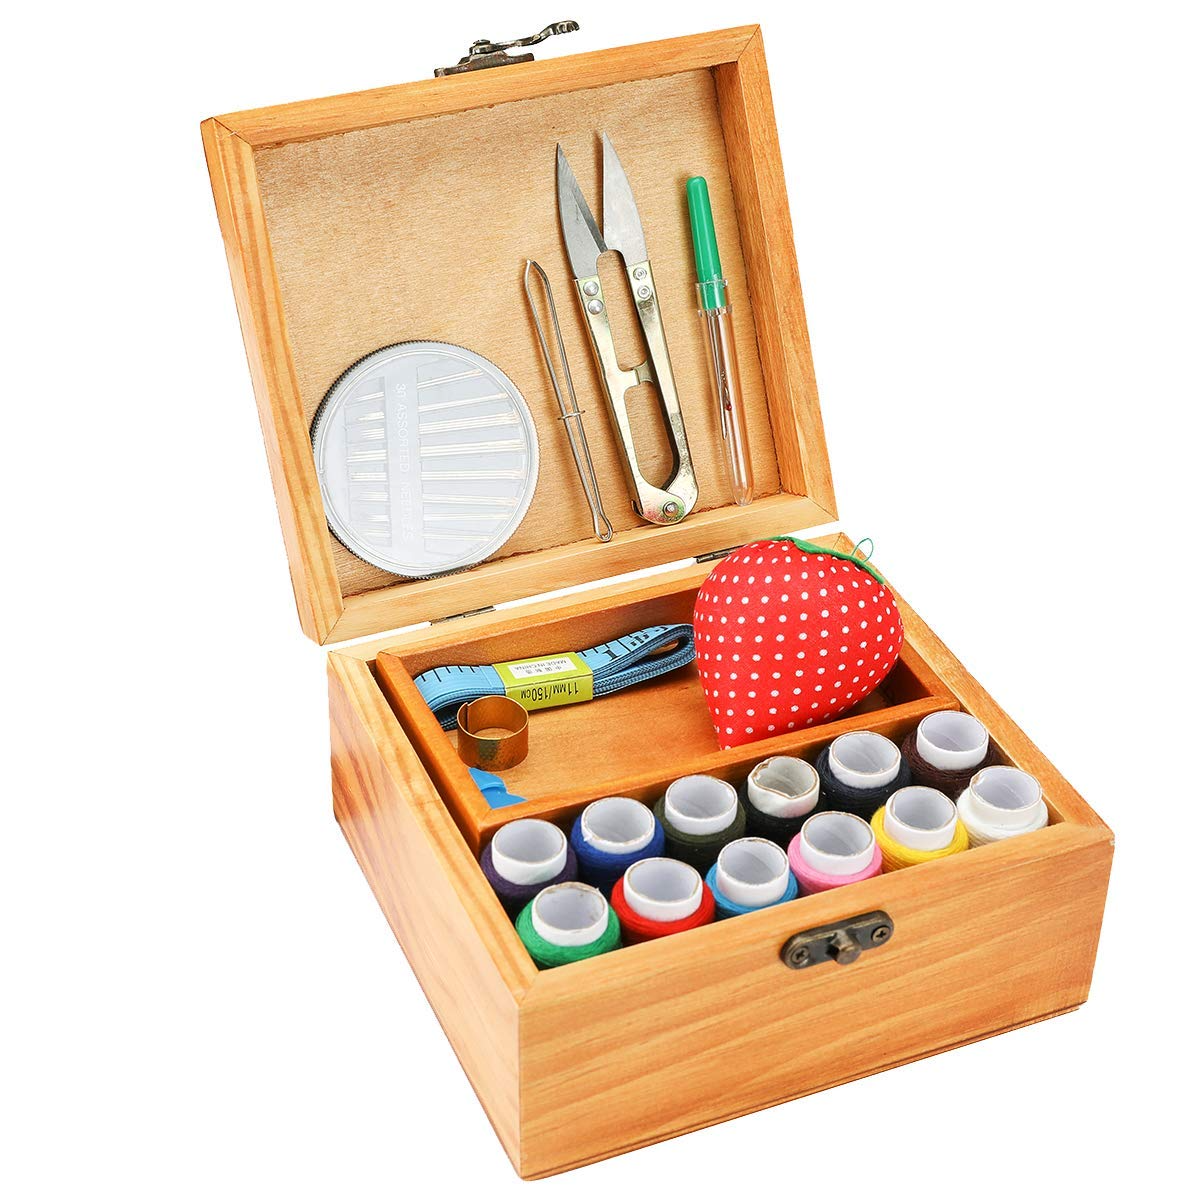 Sewing Tool Kit with Retro Wooden Box, Complete Home Hand Sewing Repair  Tool Kit, Wooden Sewing Supplies Thread Needle Kit for Adults Teenagers